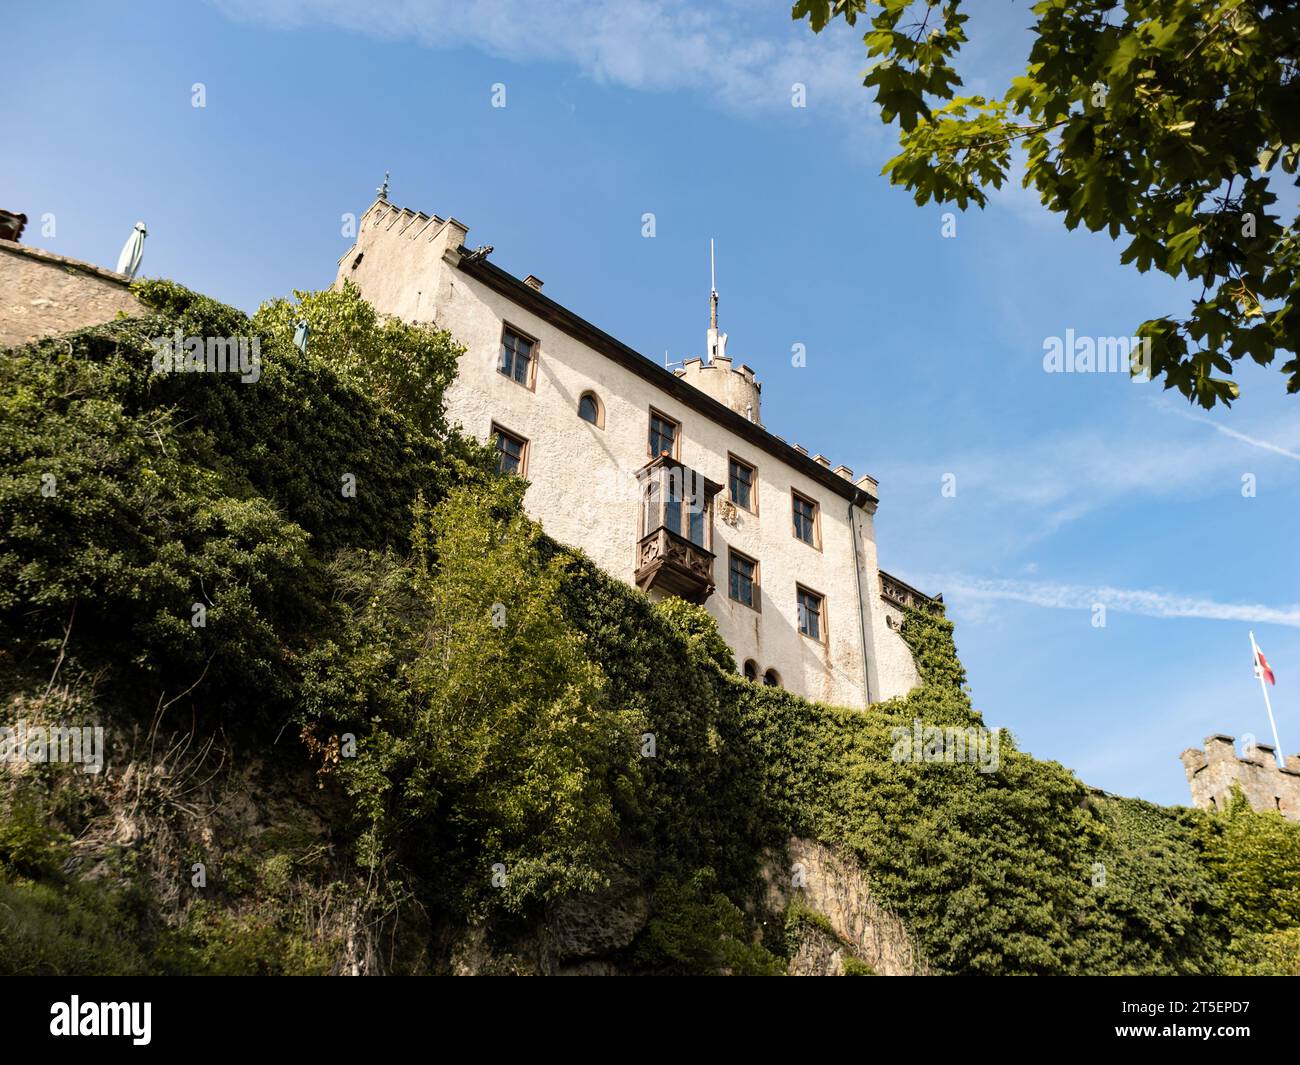 Castle building in the Franconian Switzerland. The exterior of the old house is beautiful and renovated. The Landmark is located on a hill. Stock Photo